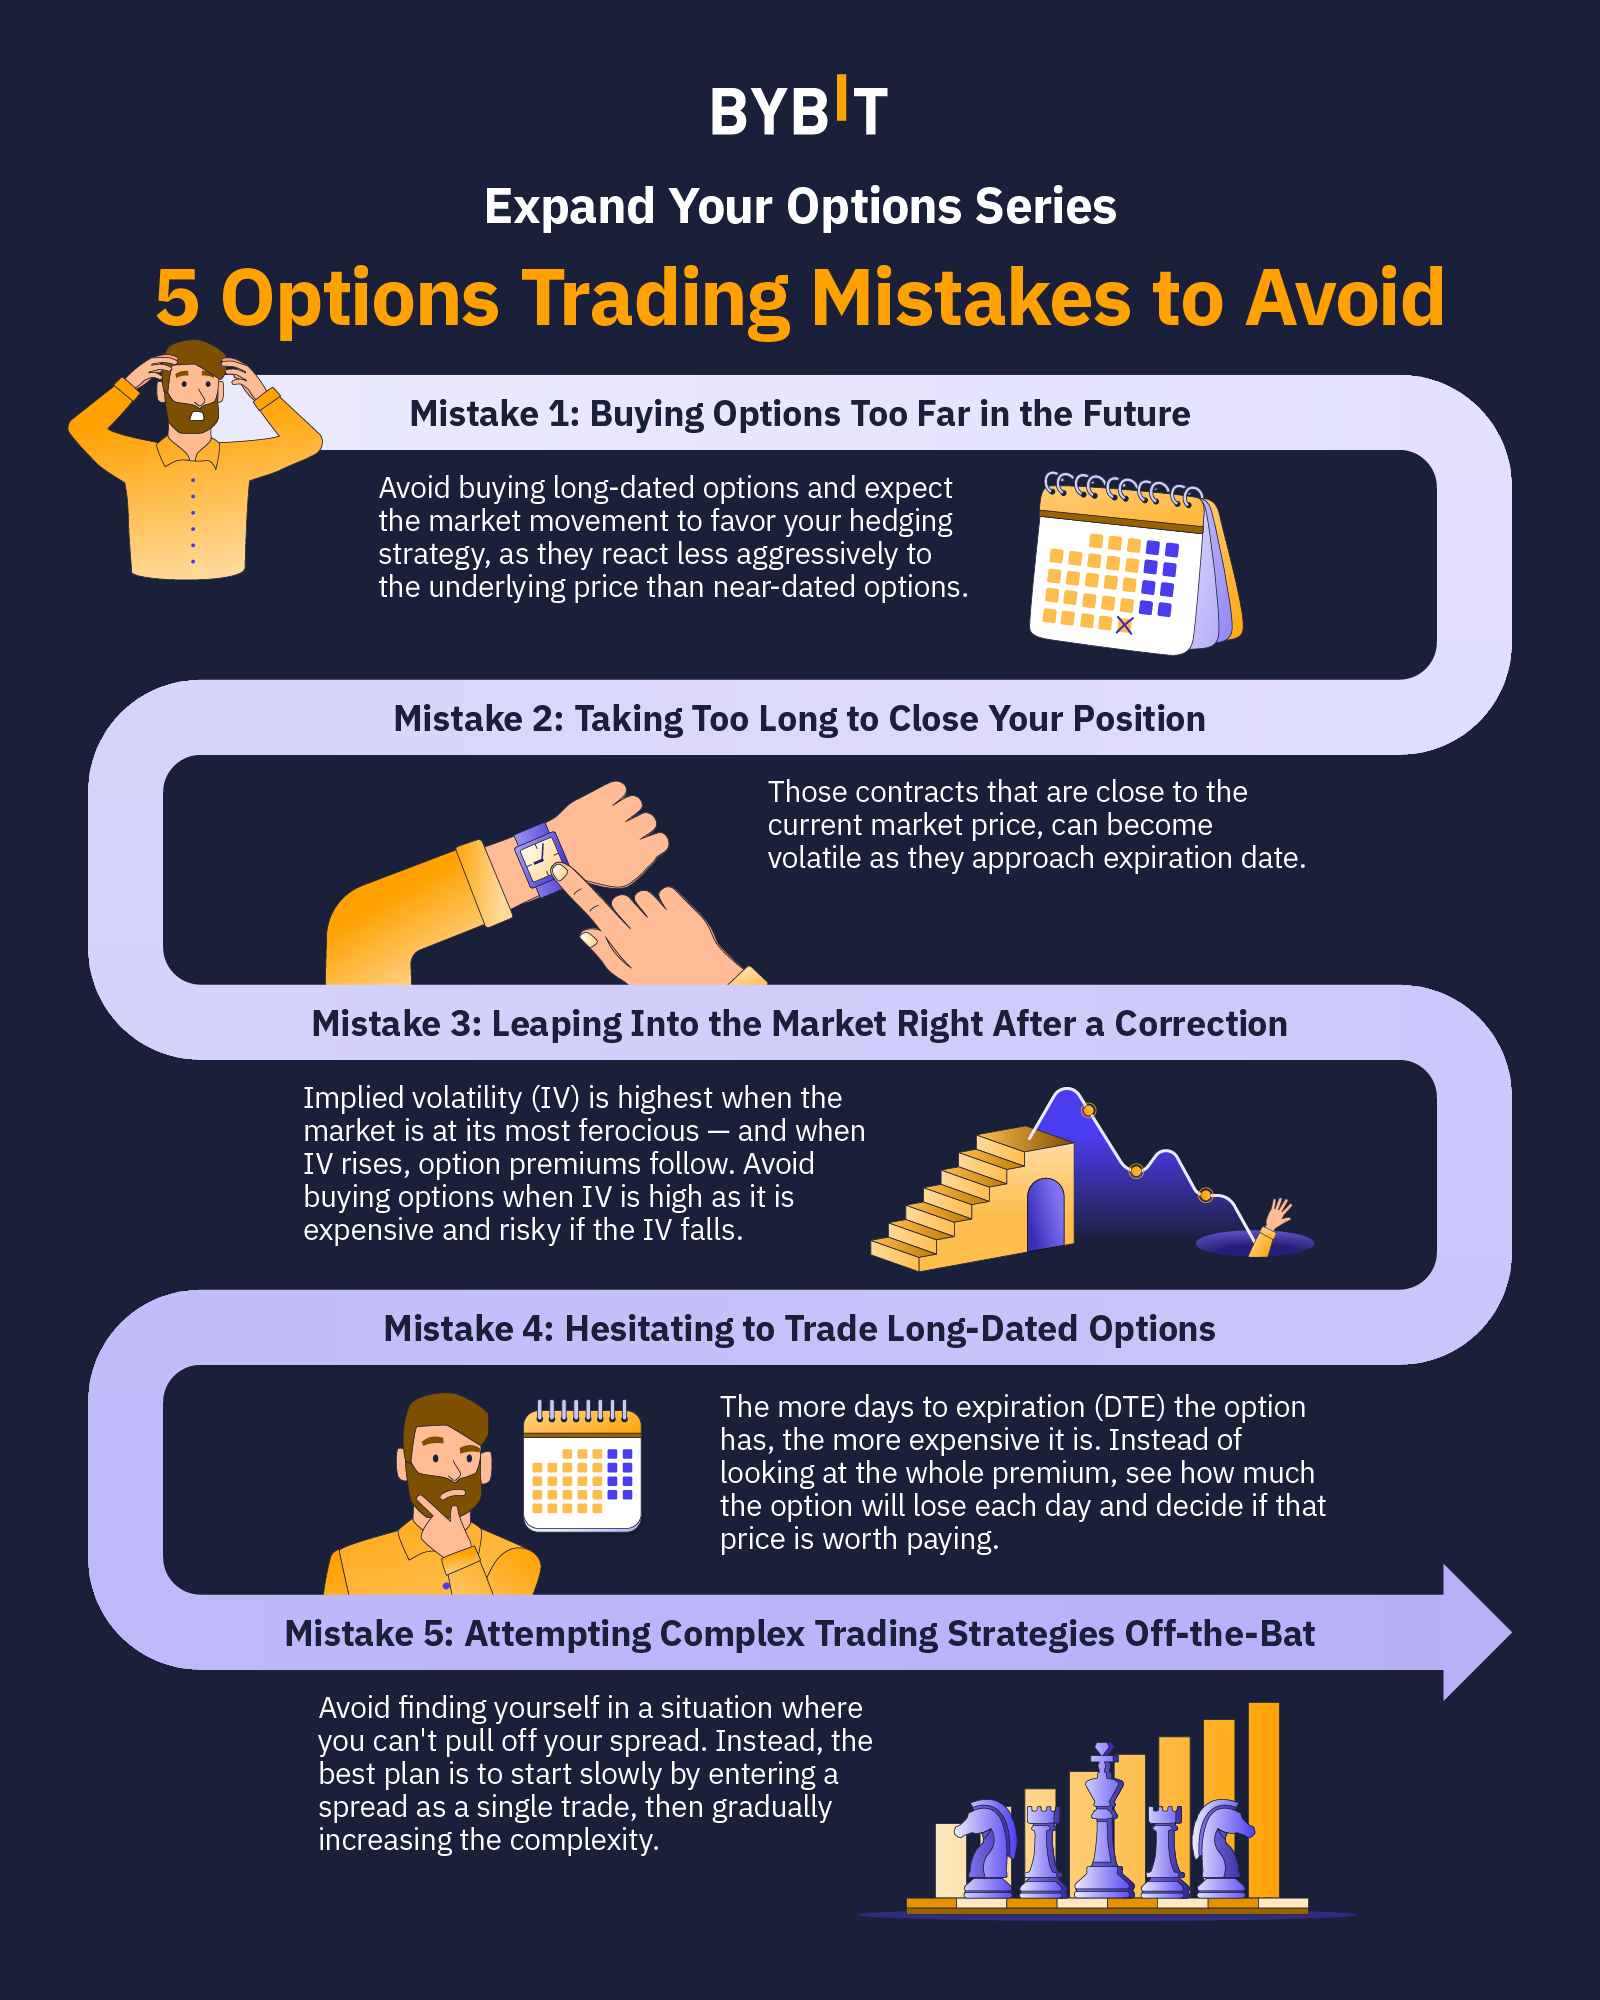 5 options trading mistakes to avoid